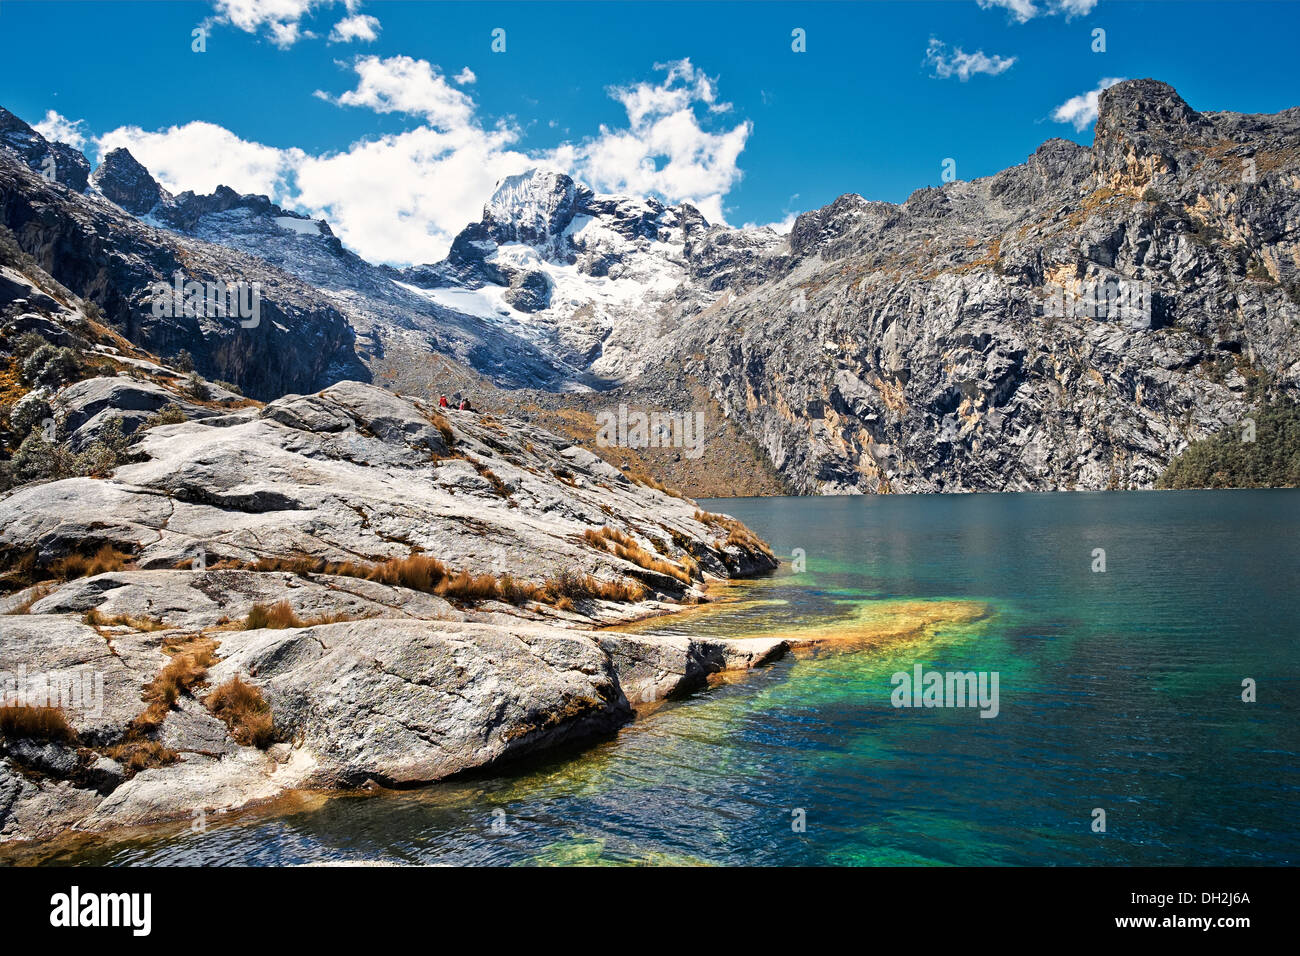 Nev Churup Summit and Laguna, Huascaran National Park in the Andes, South America. Stock Photo